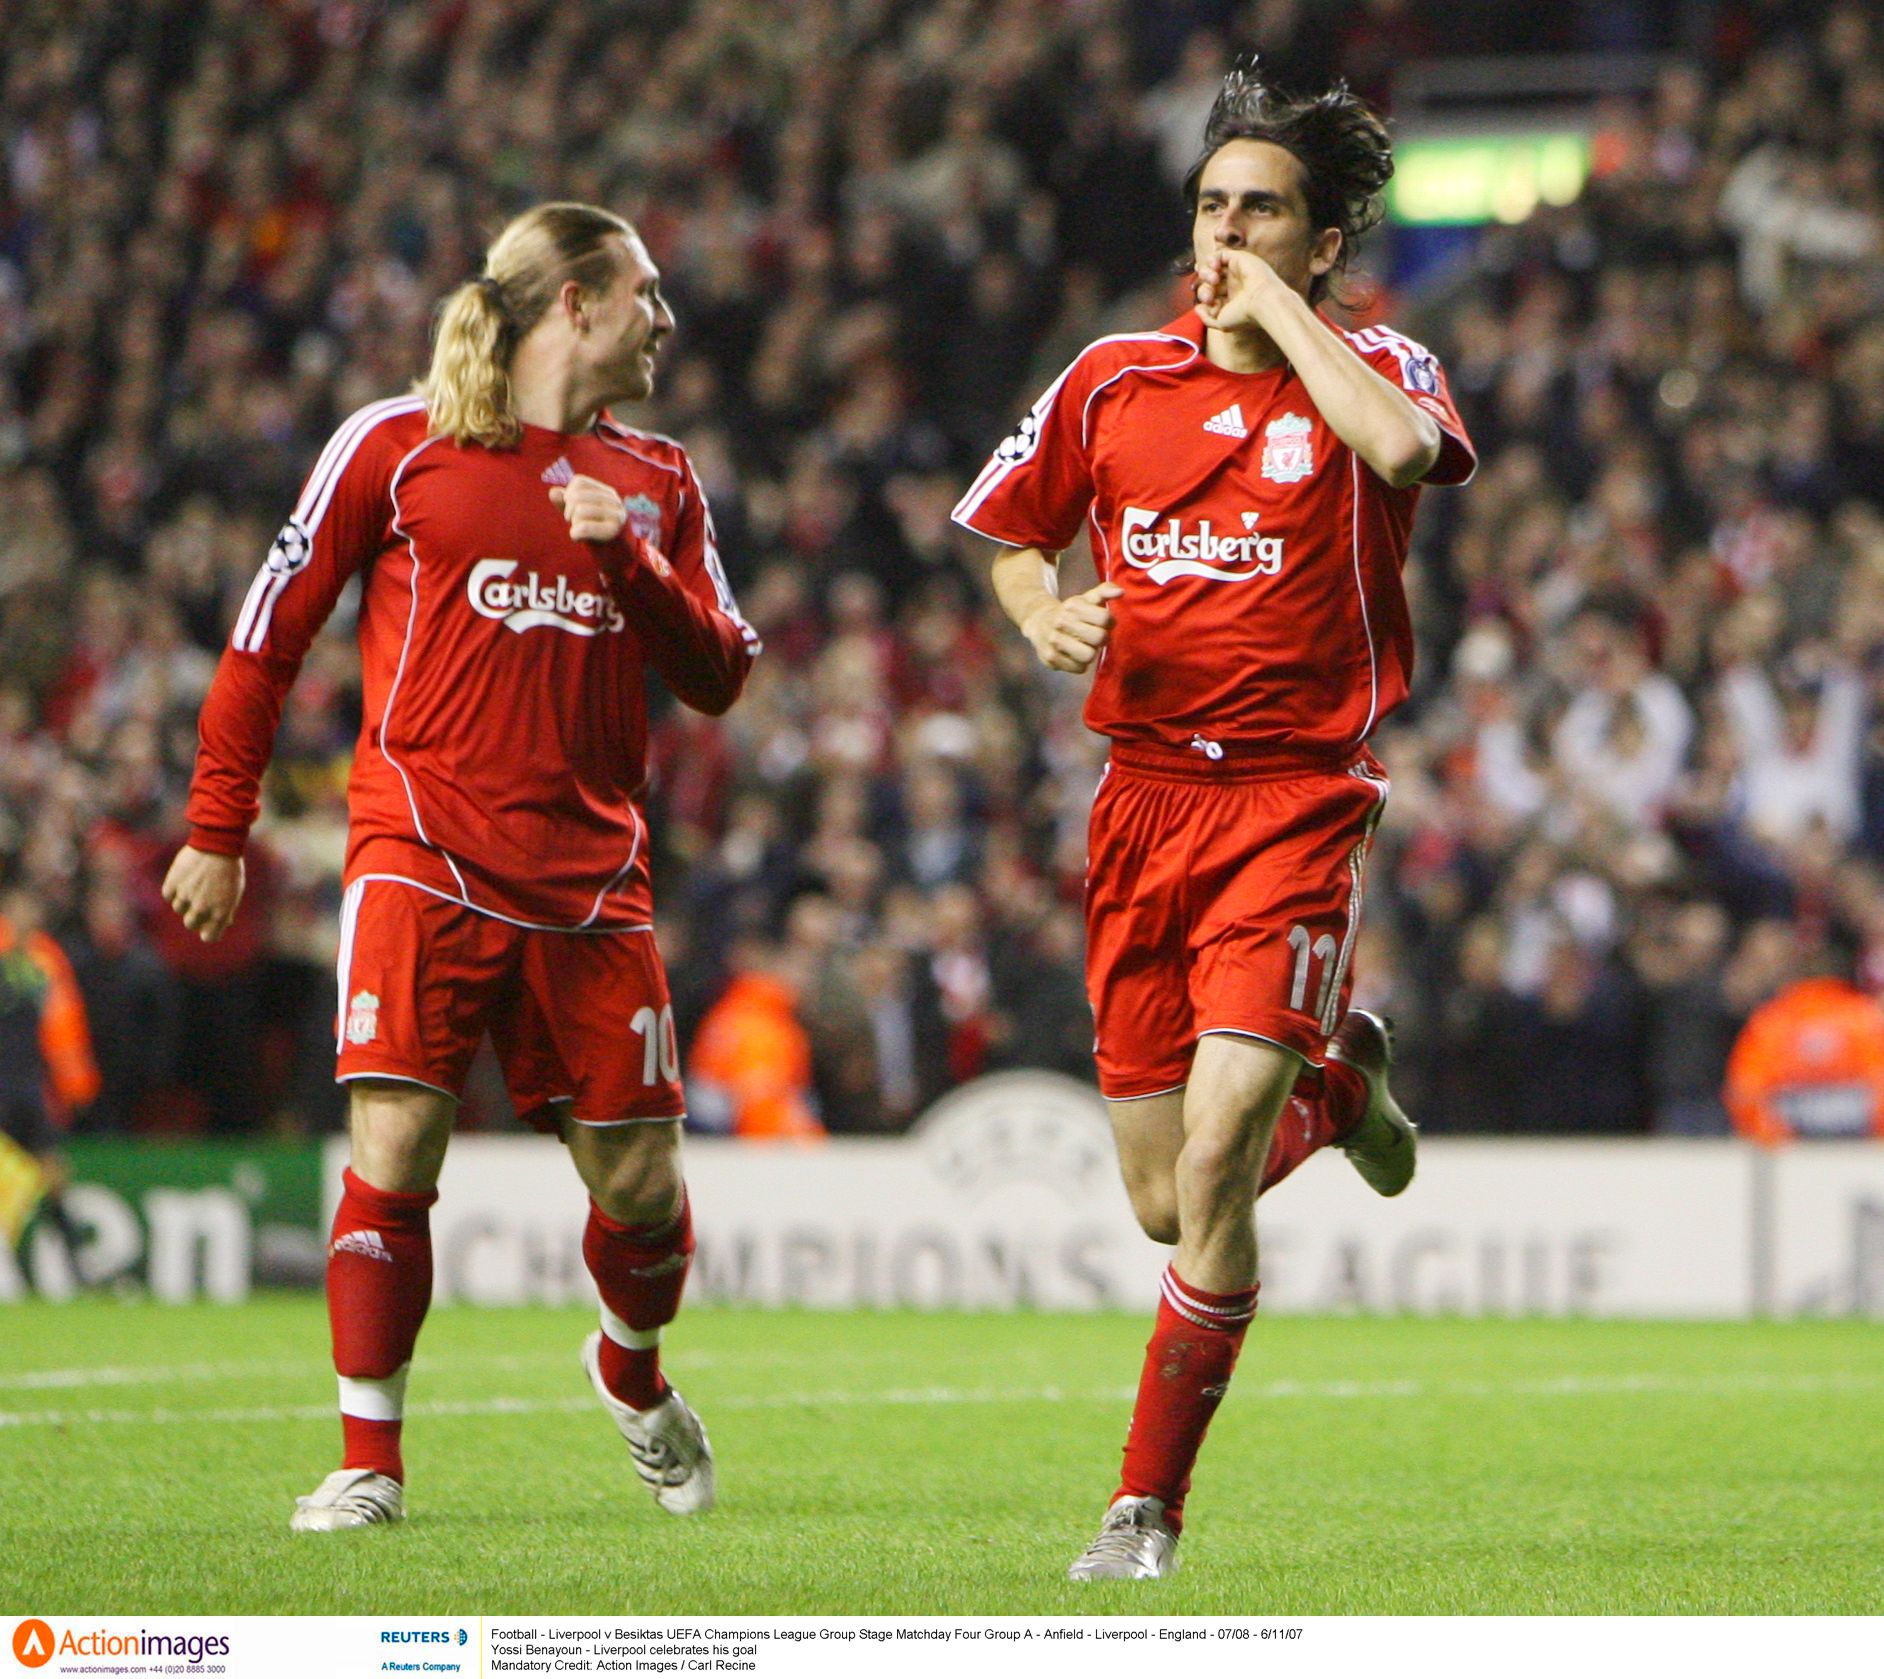 Yossi Benayoun and Andriy Voronin in action for Liverpool